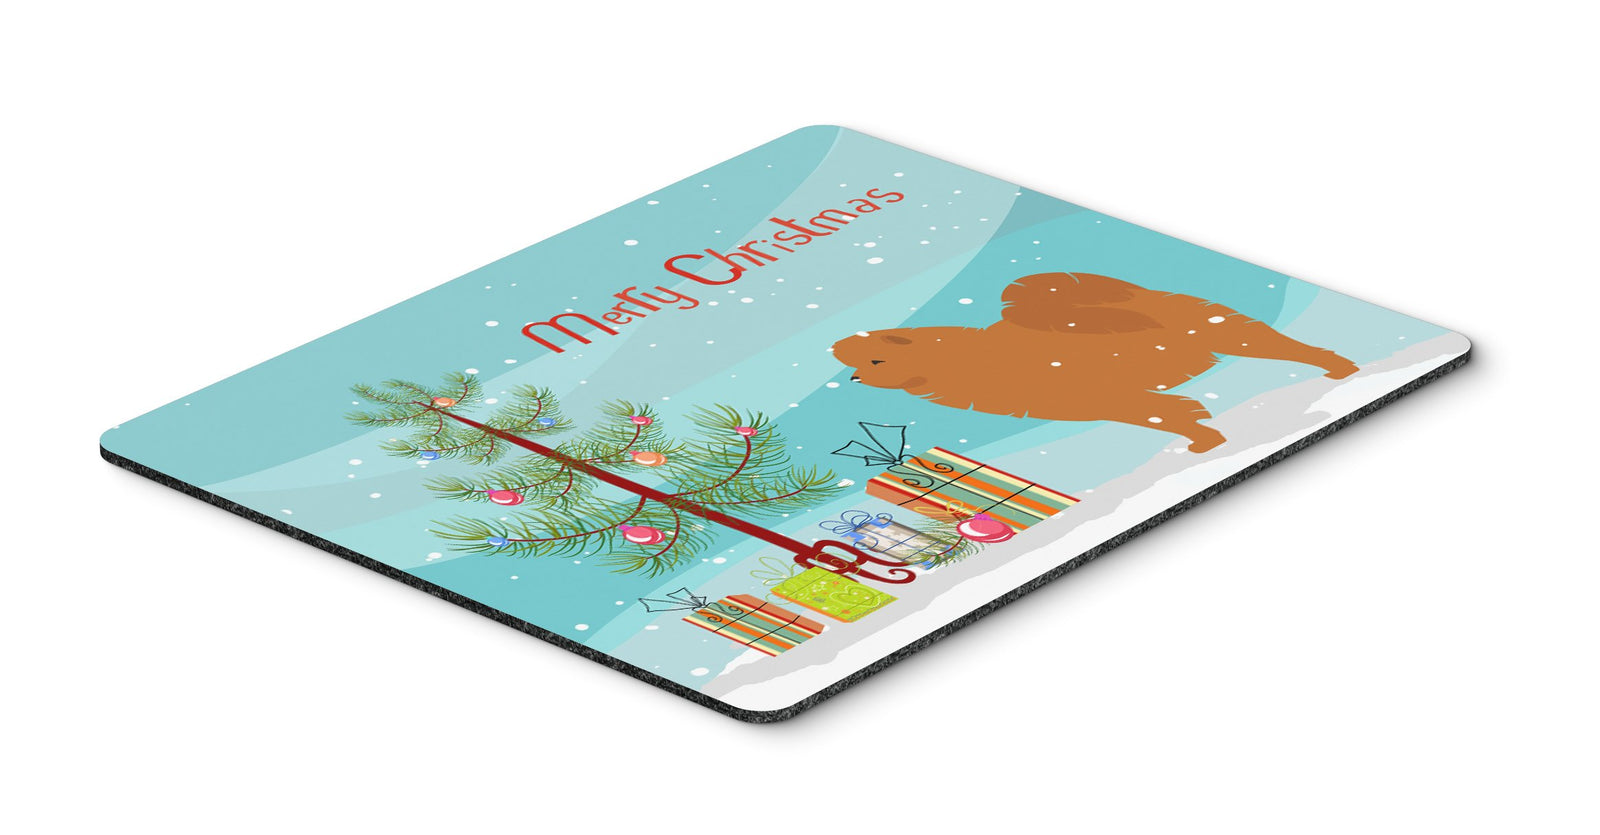 Chow Chow Merry Christmas Tree Mouse Pad, Hot Pad or Trivet by Caroline's Treasures